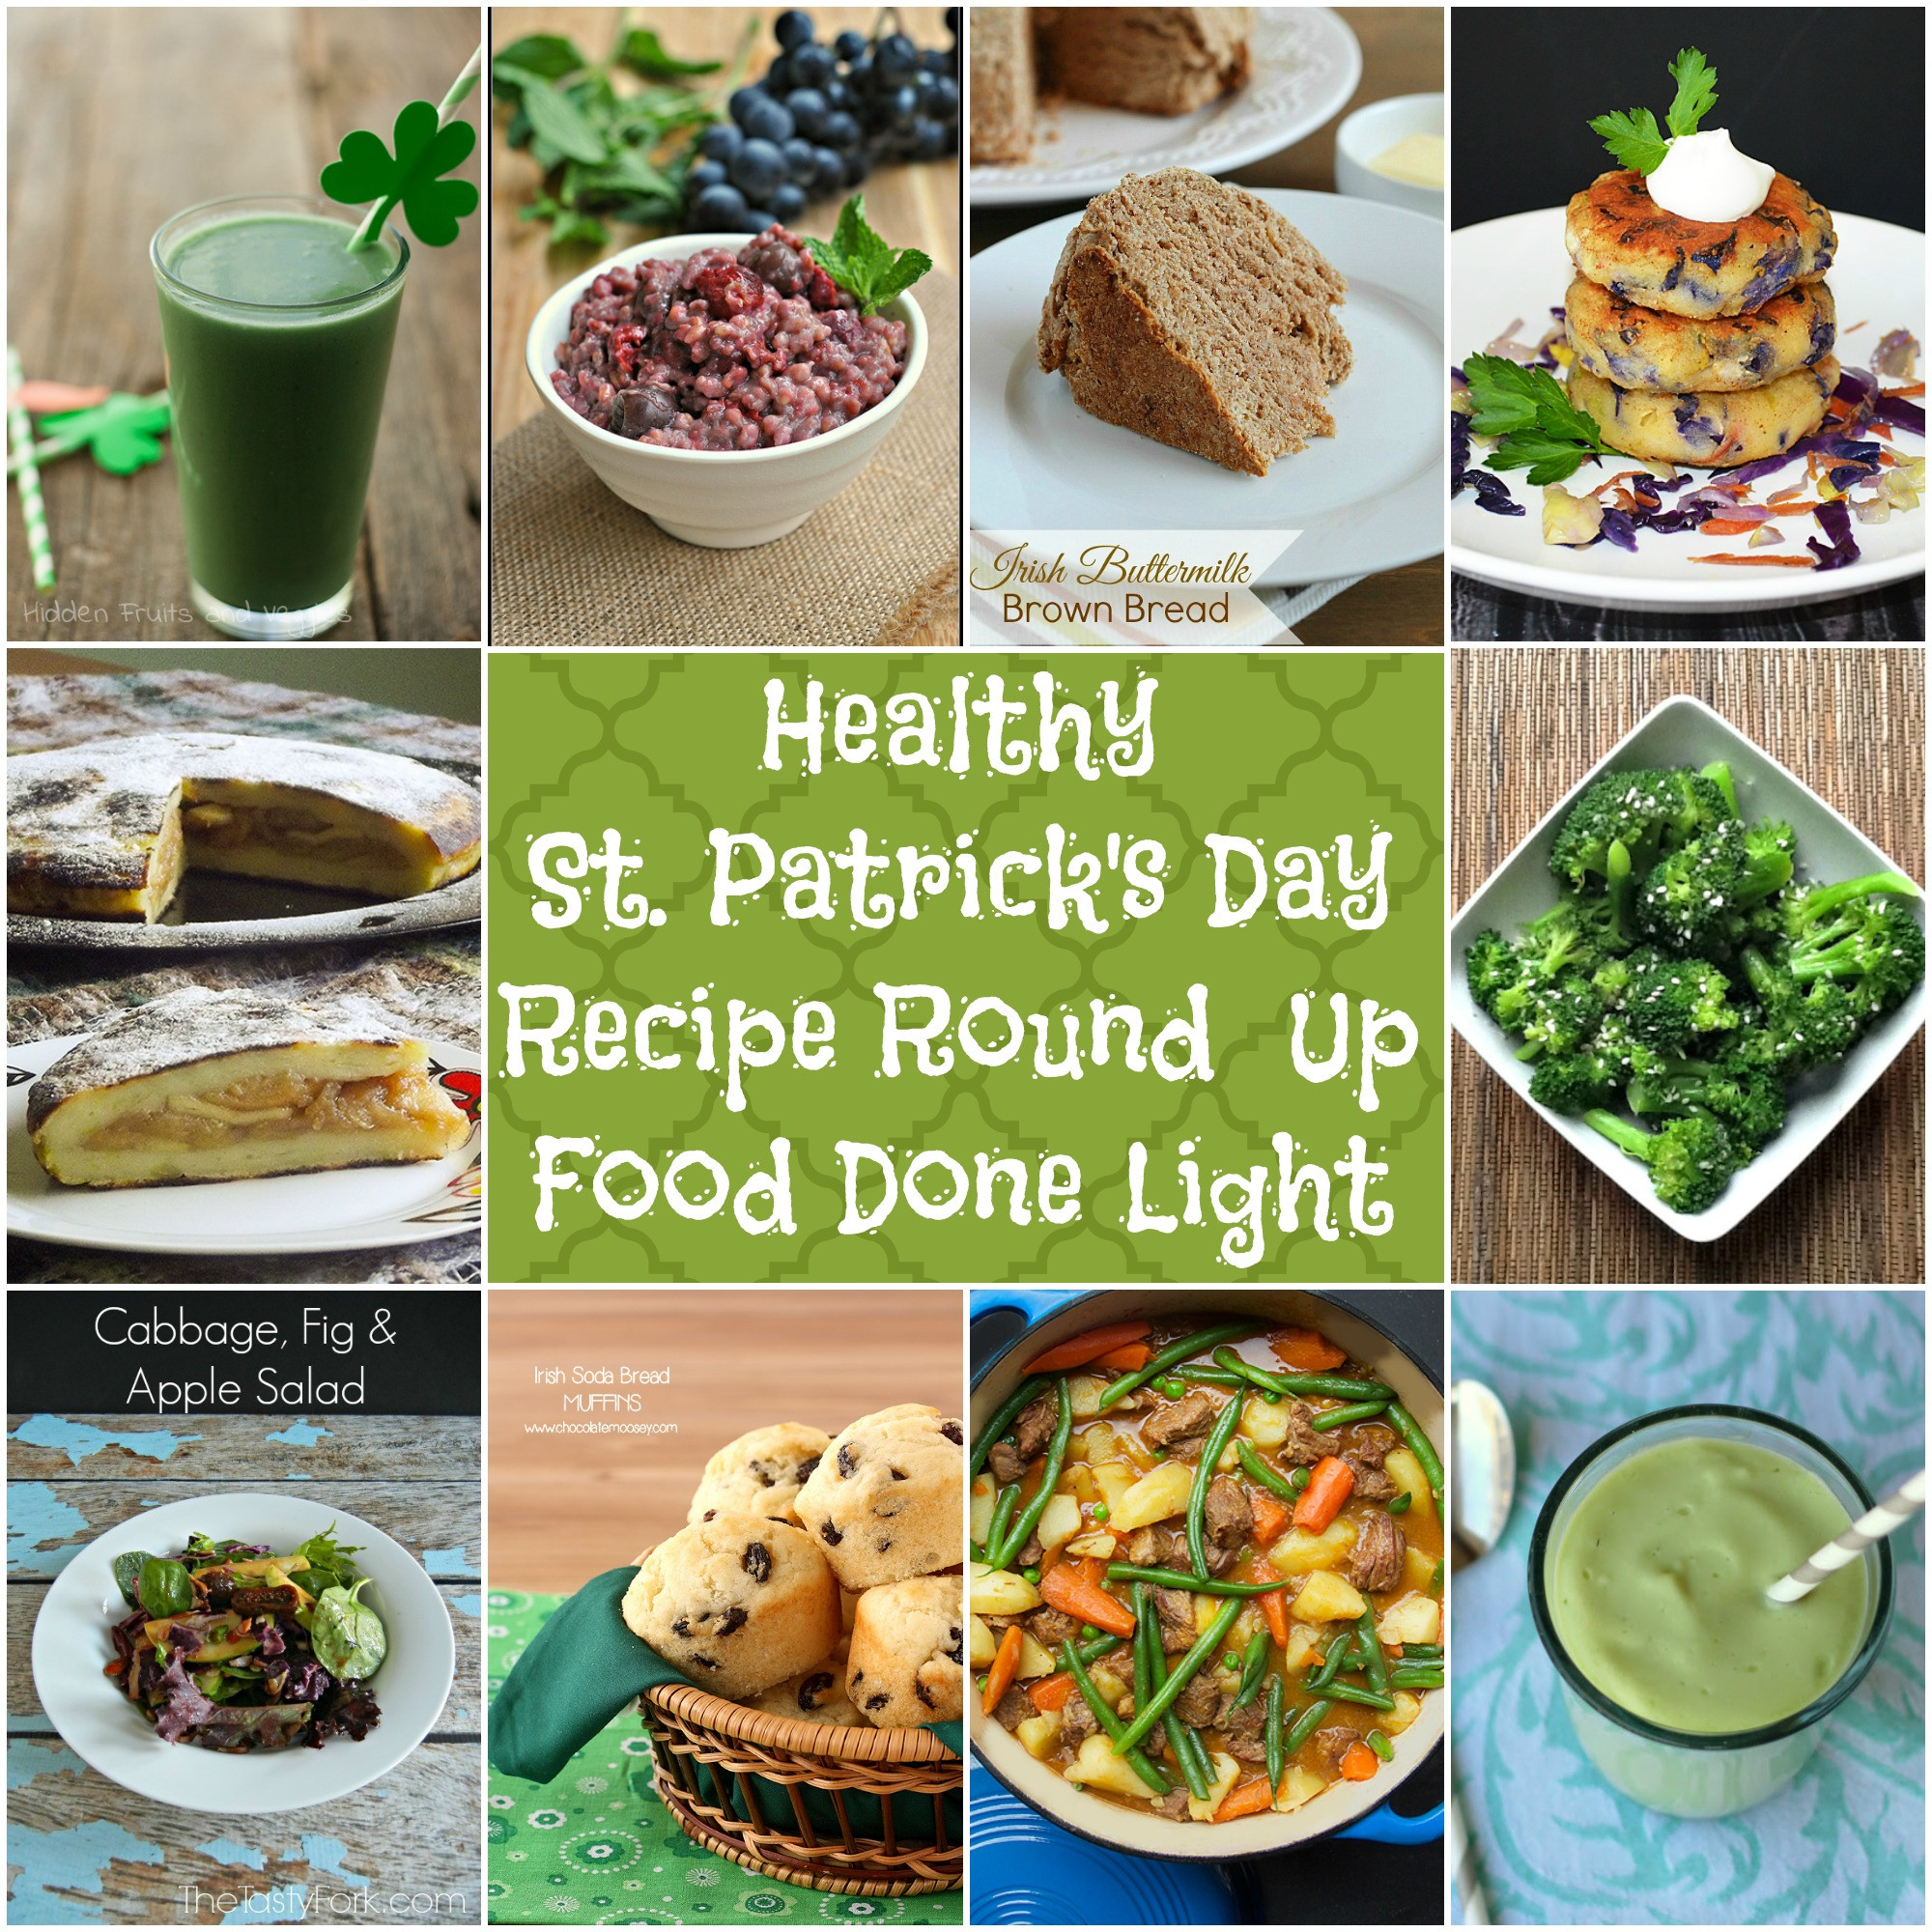 St Patrick's Day Food Recipes
 Healthy St Patricks Day Recipe Round Up Food Done Light